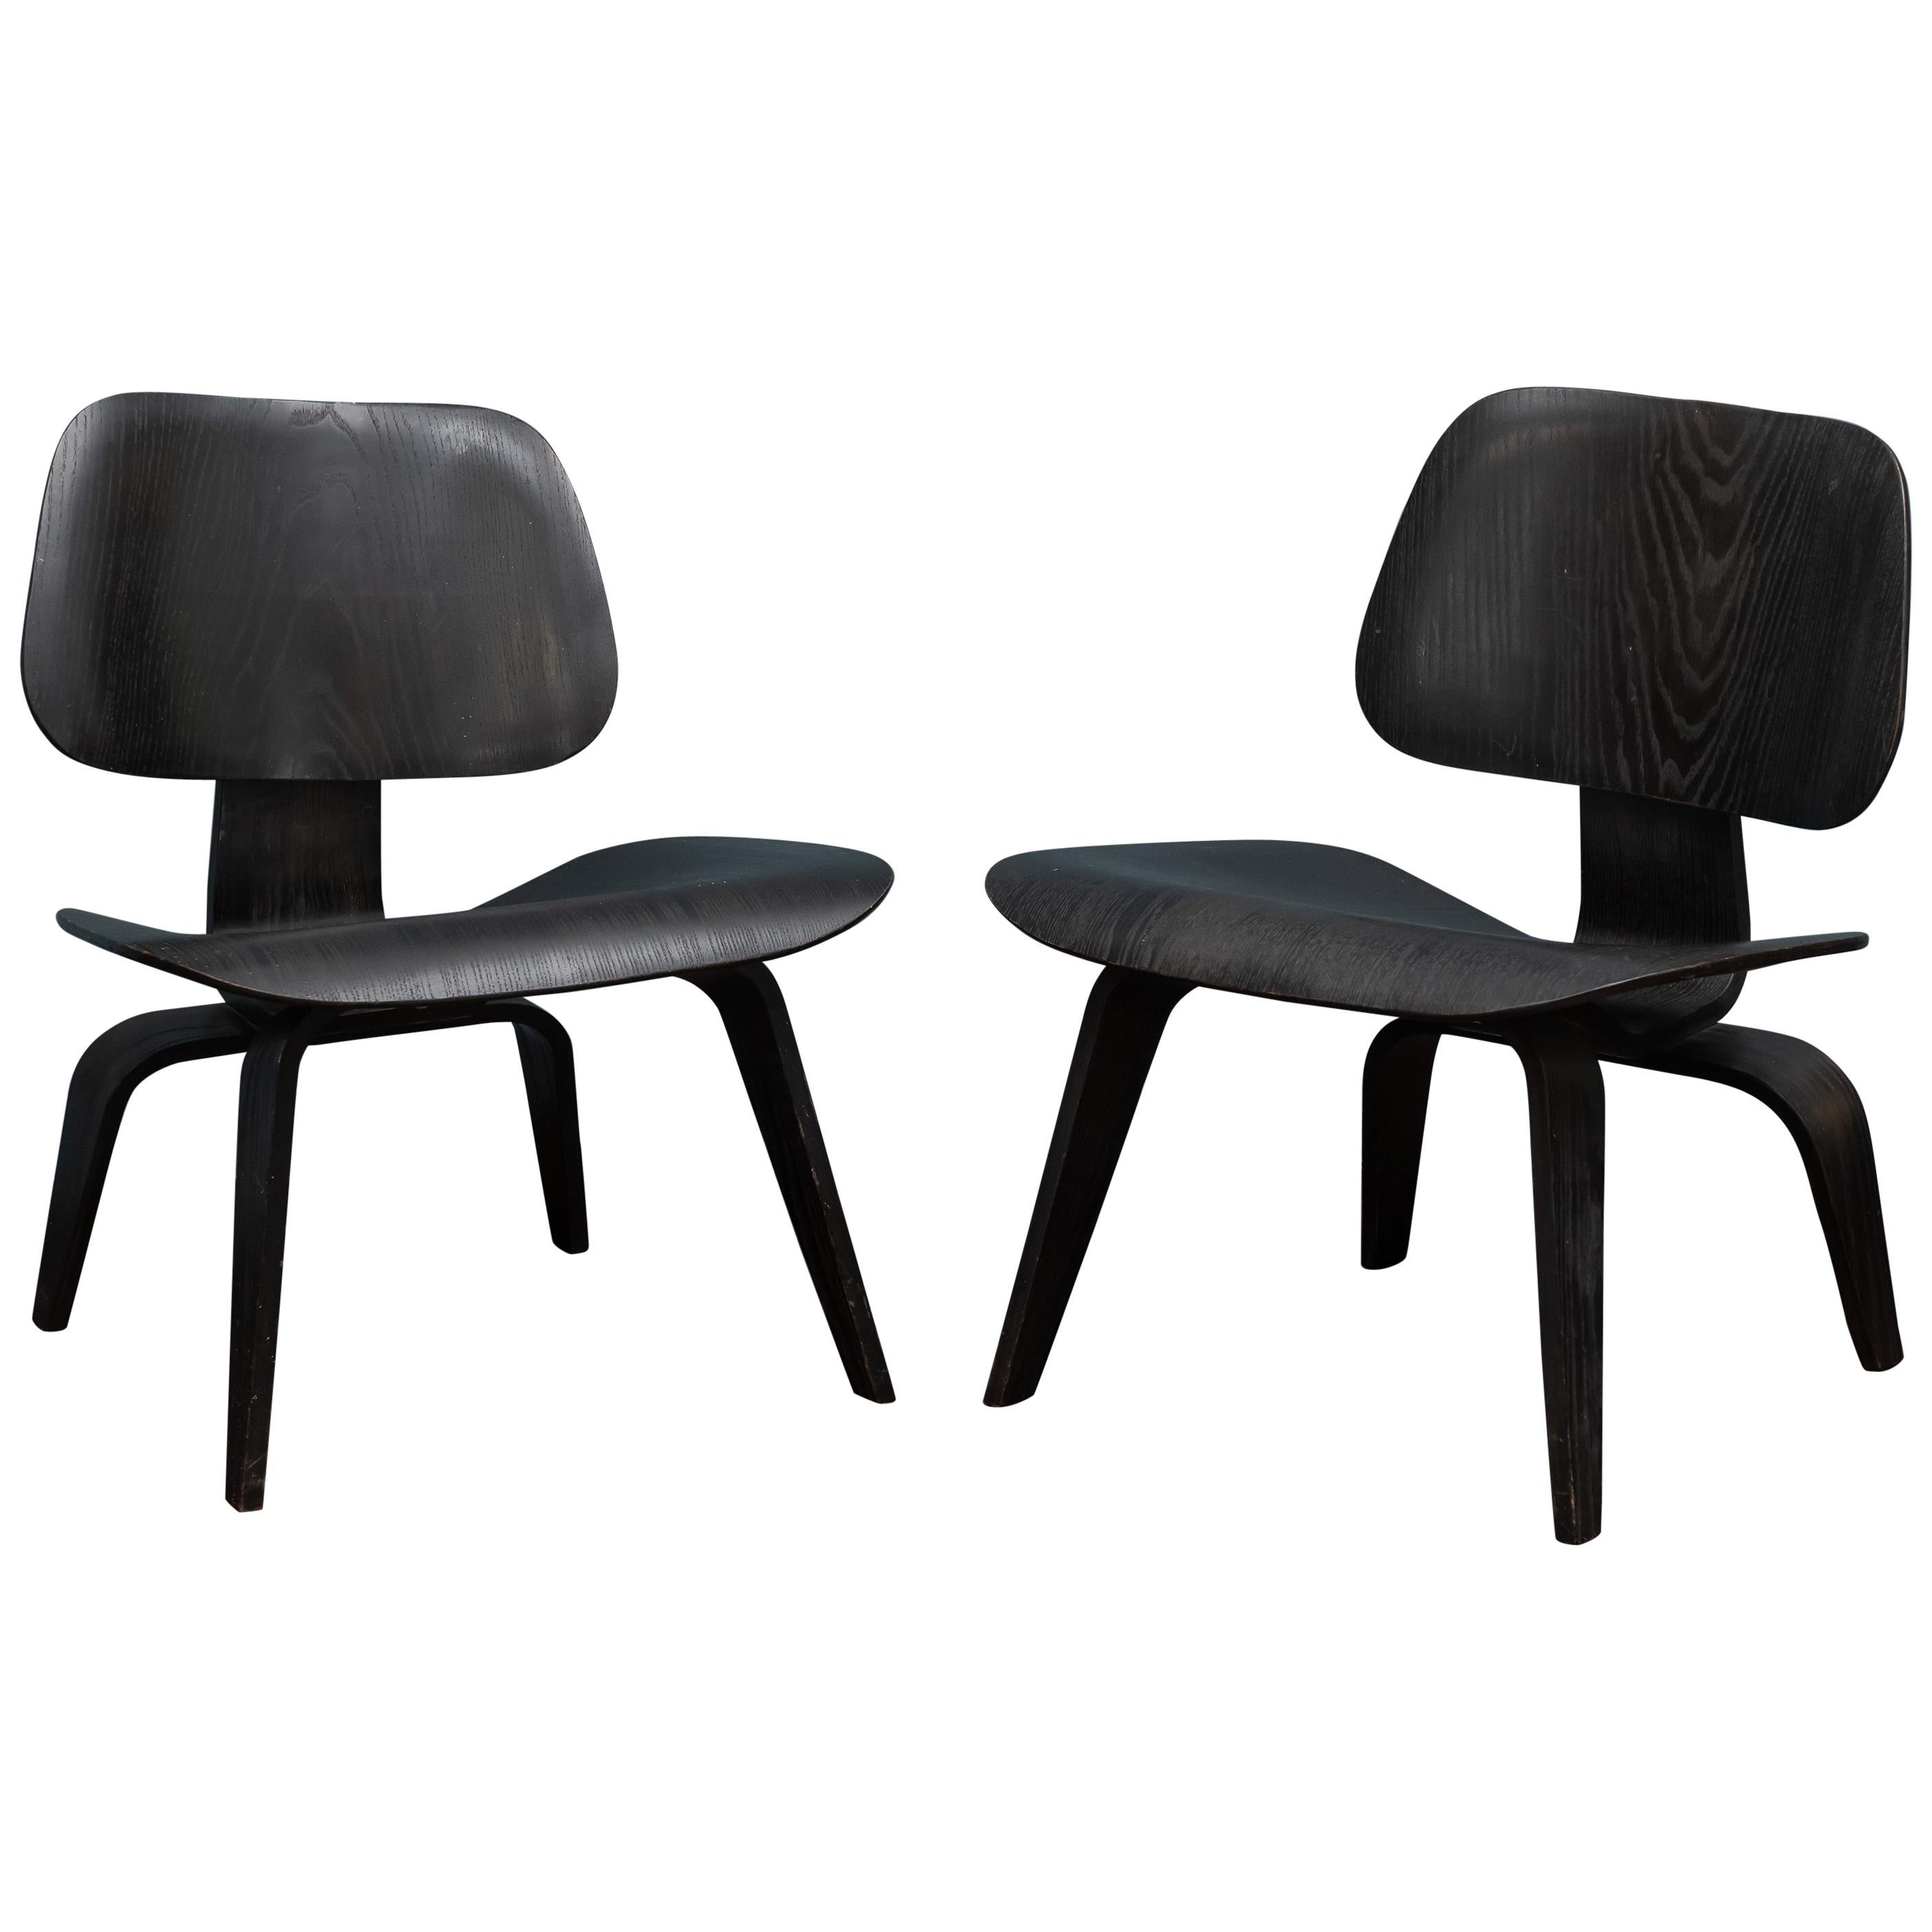 Charles Eames LCW Lounge Chairs